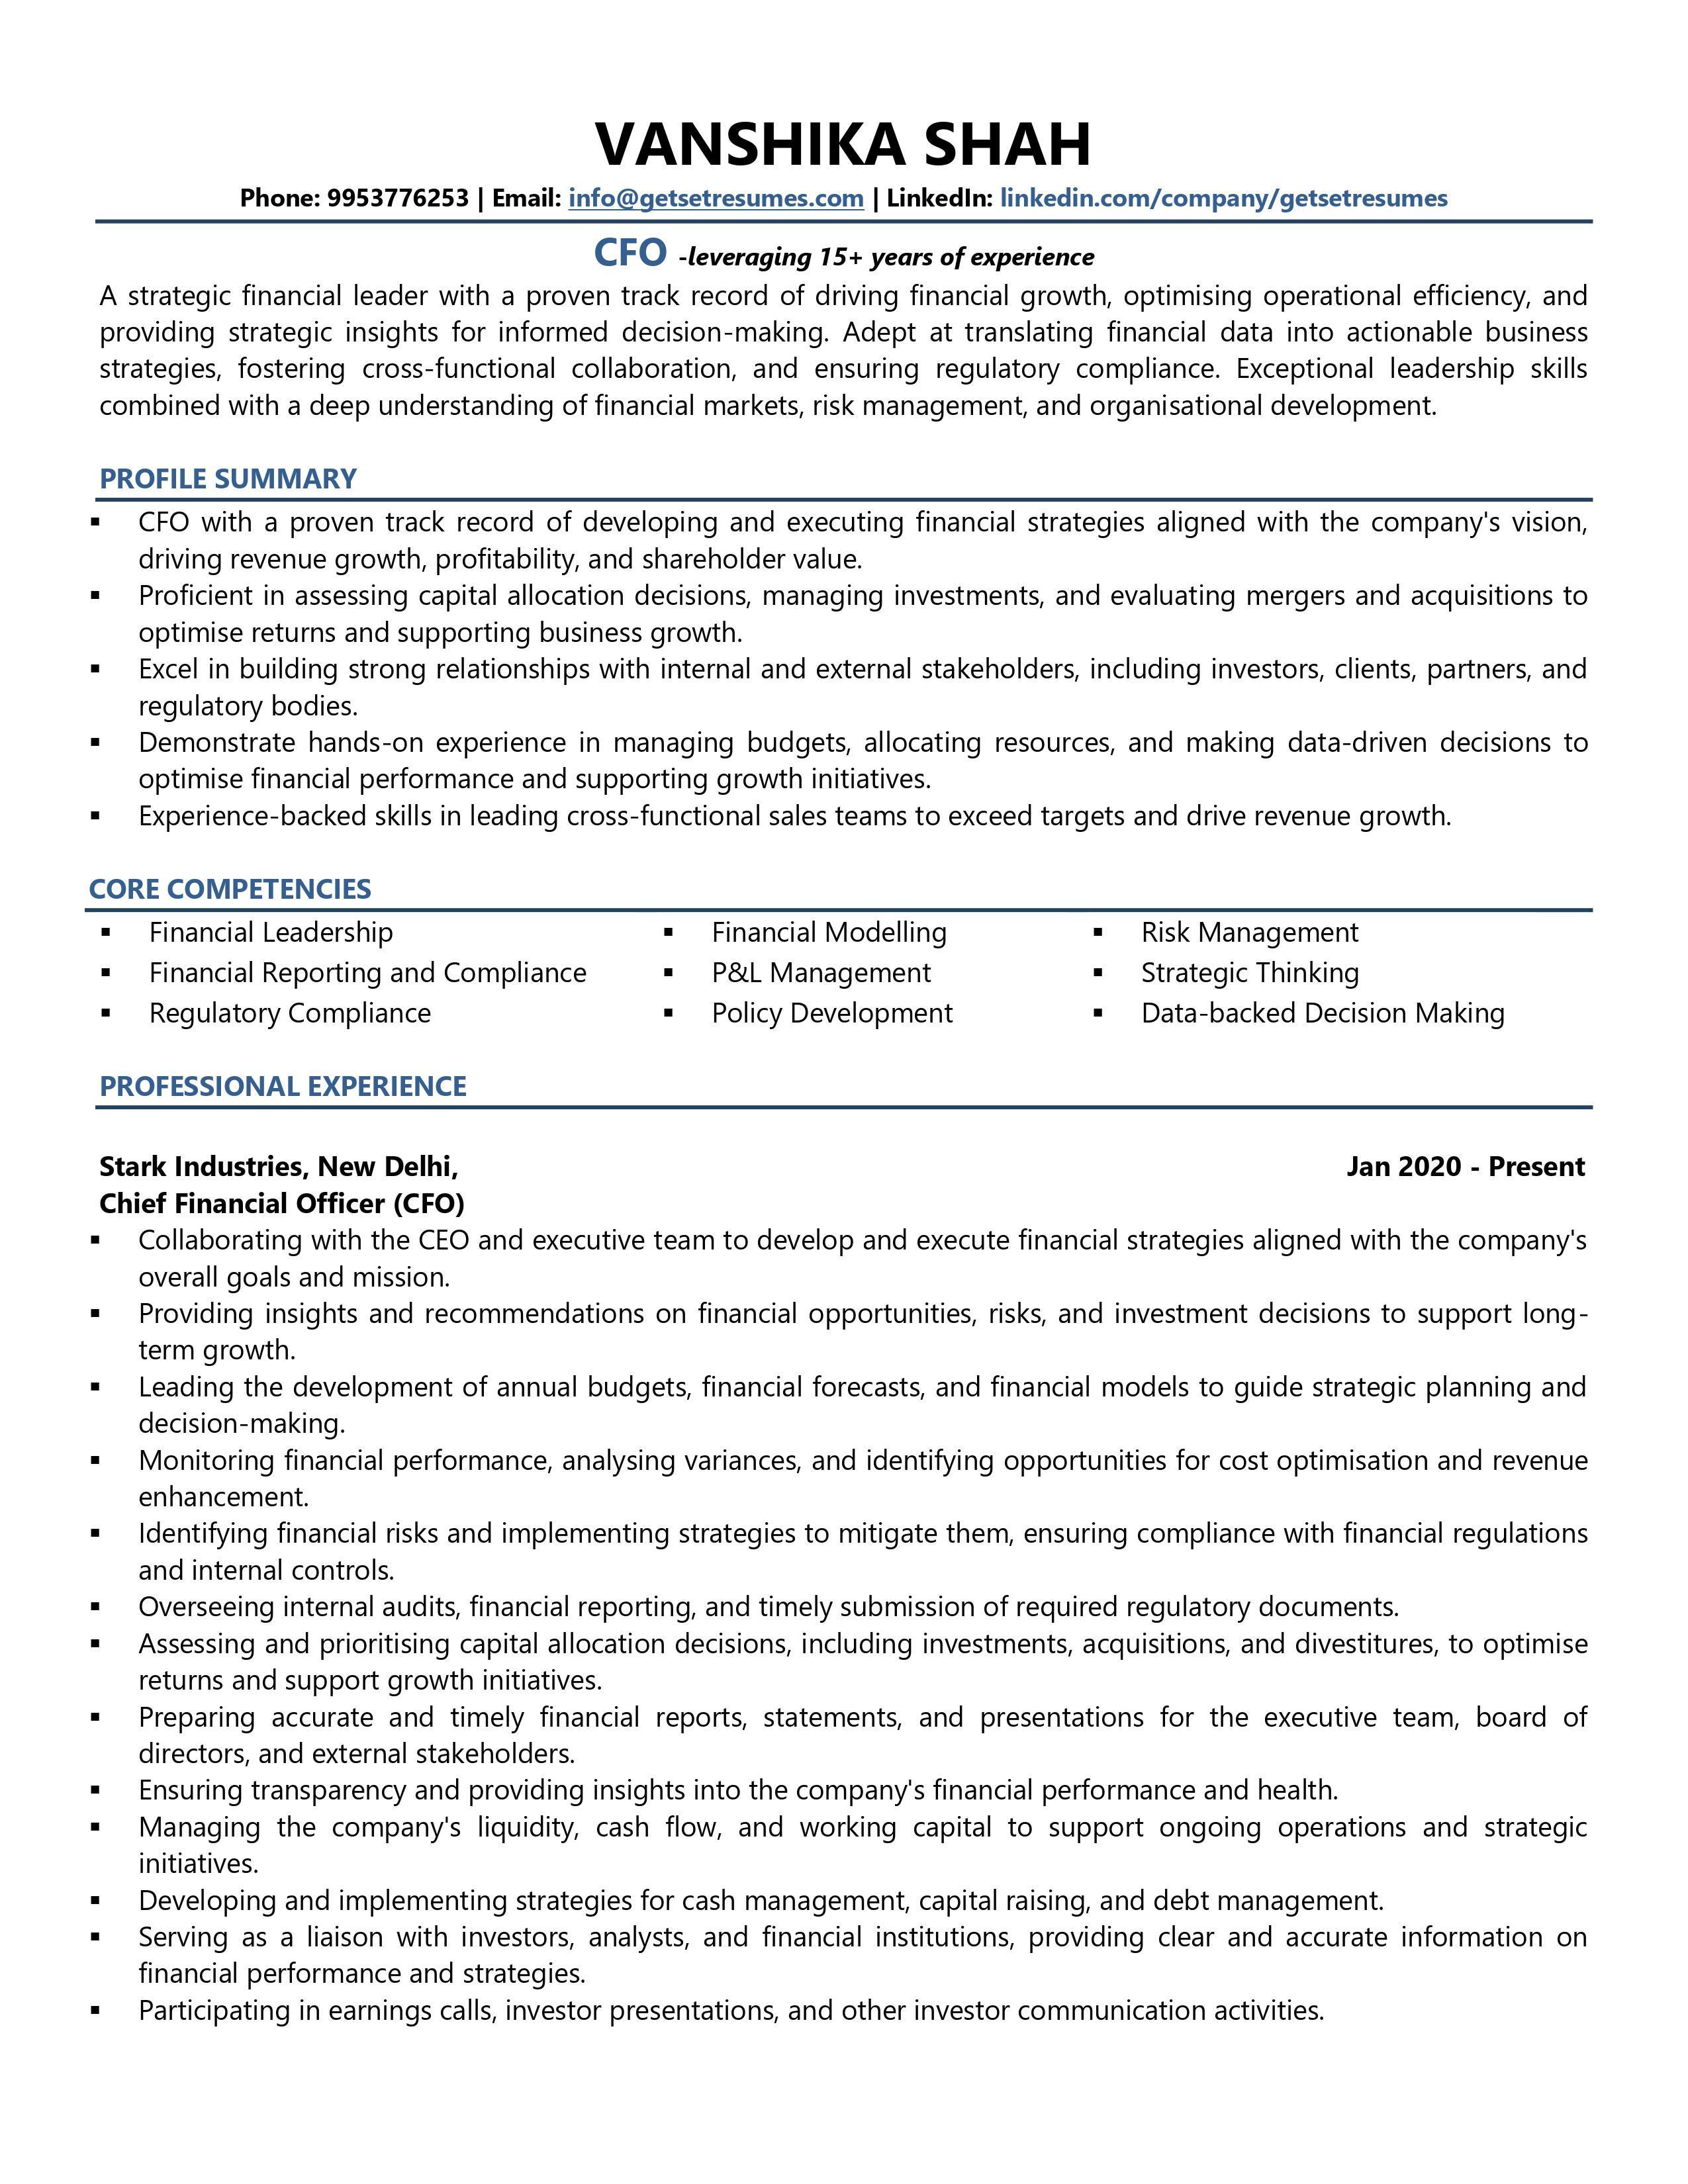 Chief Financial Officer - Resume Example & Template